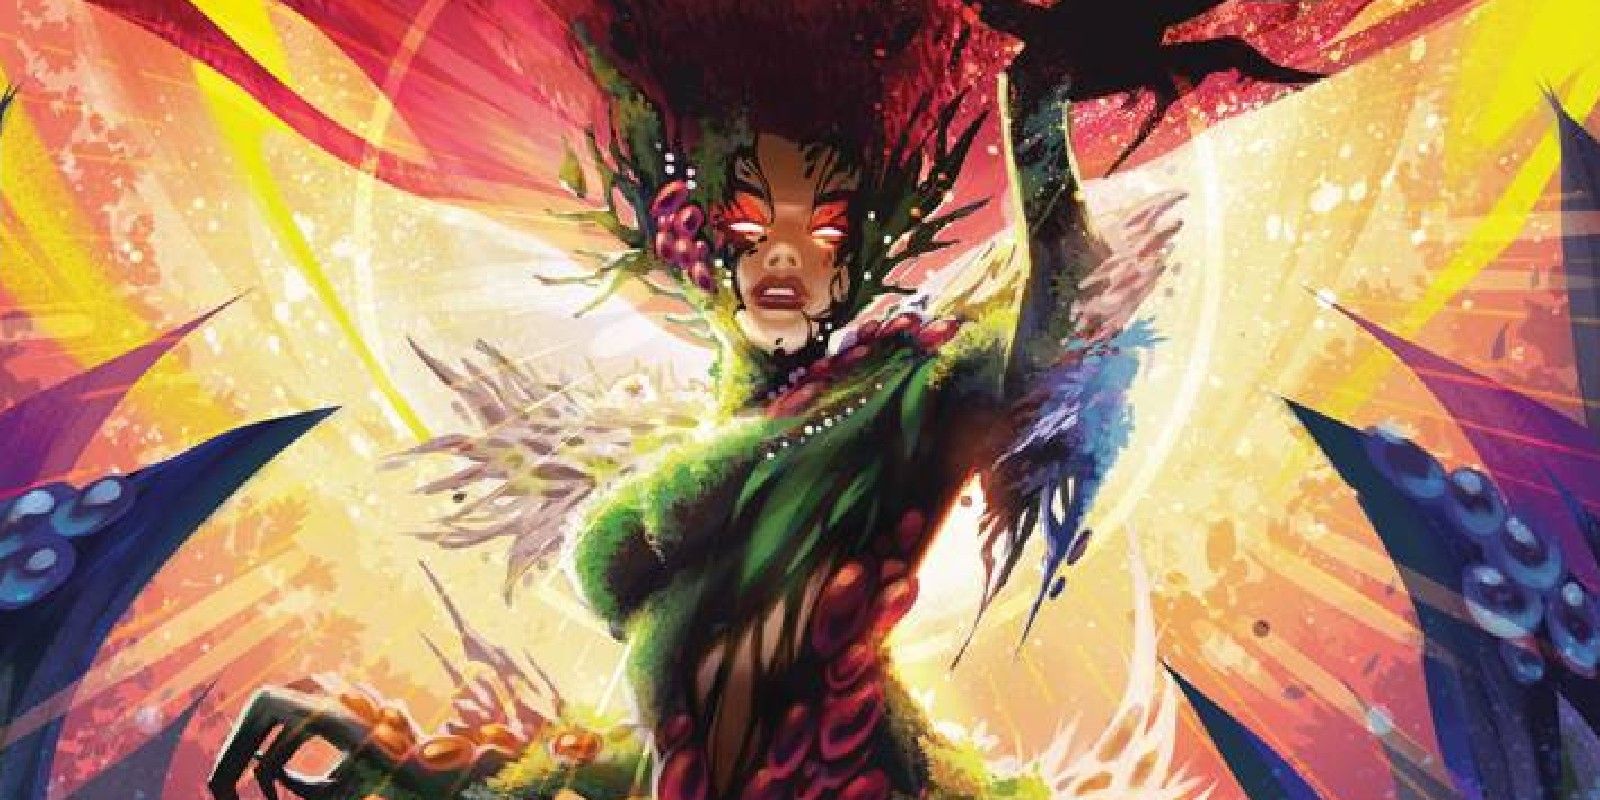 Poison Ivy Using Her Psychedelic Powers, an explosion of colors, she looks god-like and other worldly